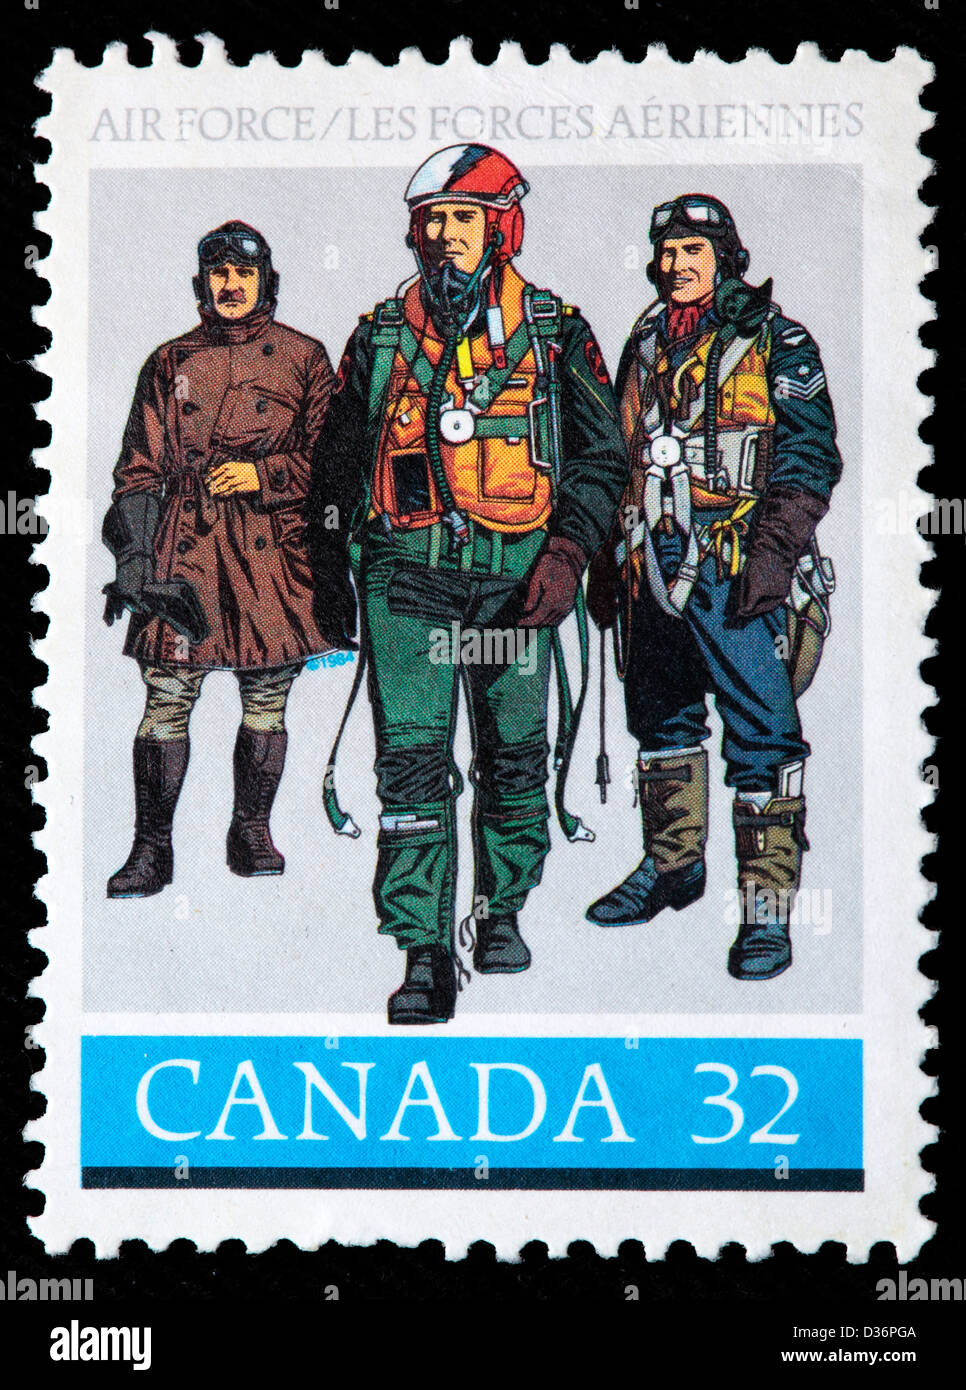 Royal Canadian Air Force, postage stamp, Canada, 1984 Stock Photo